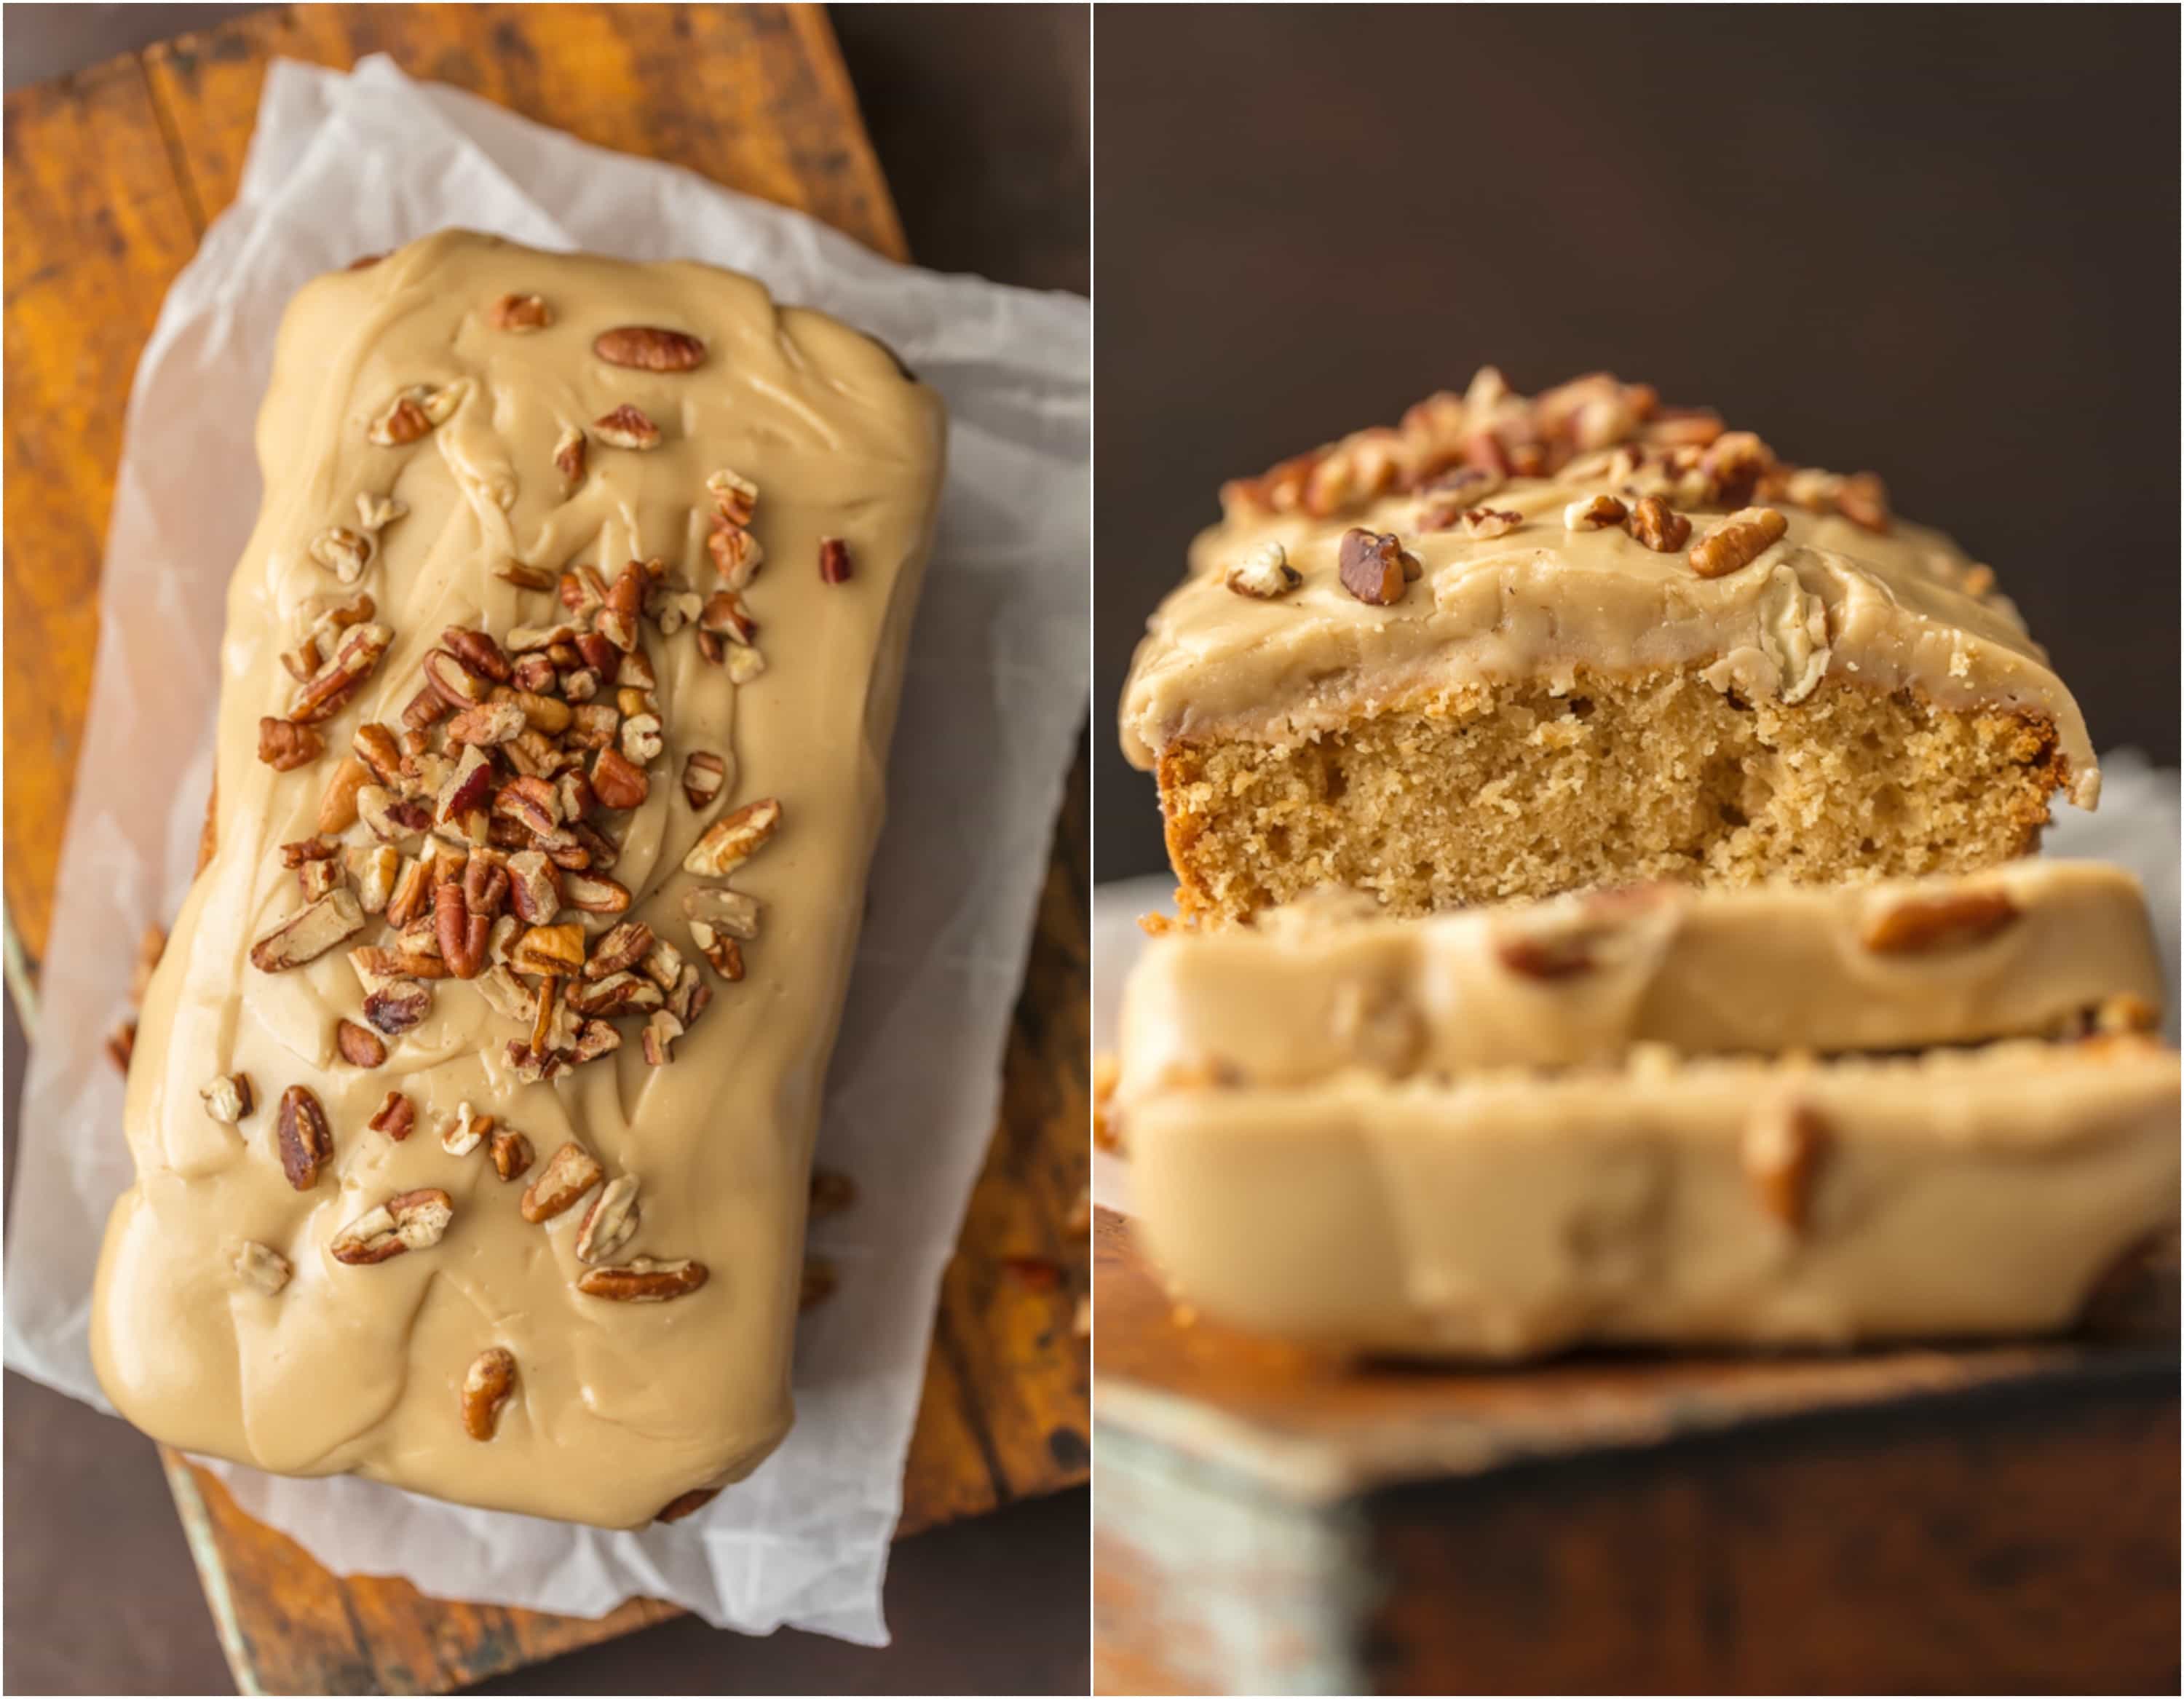 Brown Sugar Pound Cake with BROWN SUGAR ICING (let's be honest, it's caramel) is utterly delicious and just perfect for Fall. A simple classic that everyone loves. This makes a wonderful and delicious homemade gift for Christmas. The pecans add a little extra crunch to this sweet and amazing Easy Pound Cake Recipe.